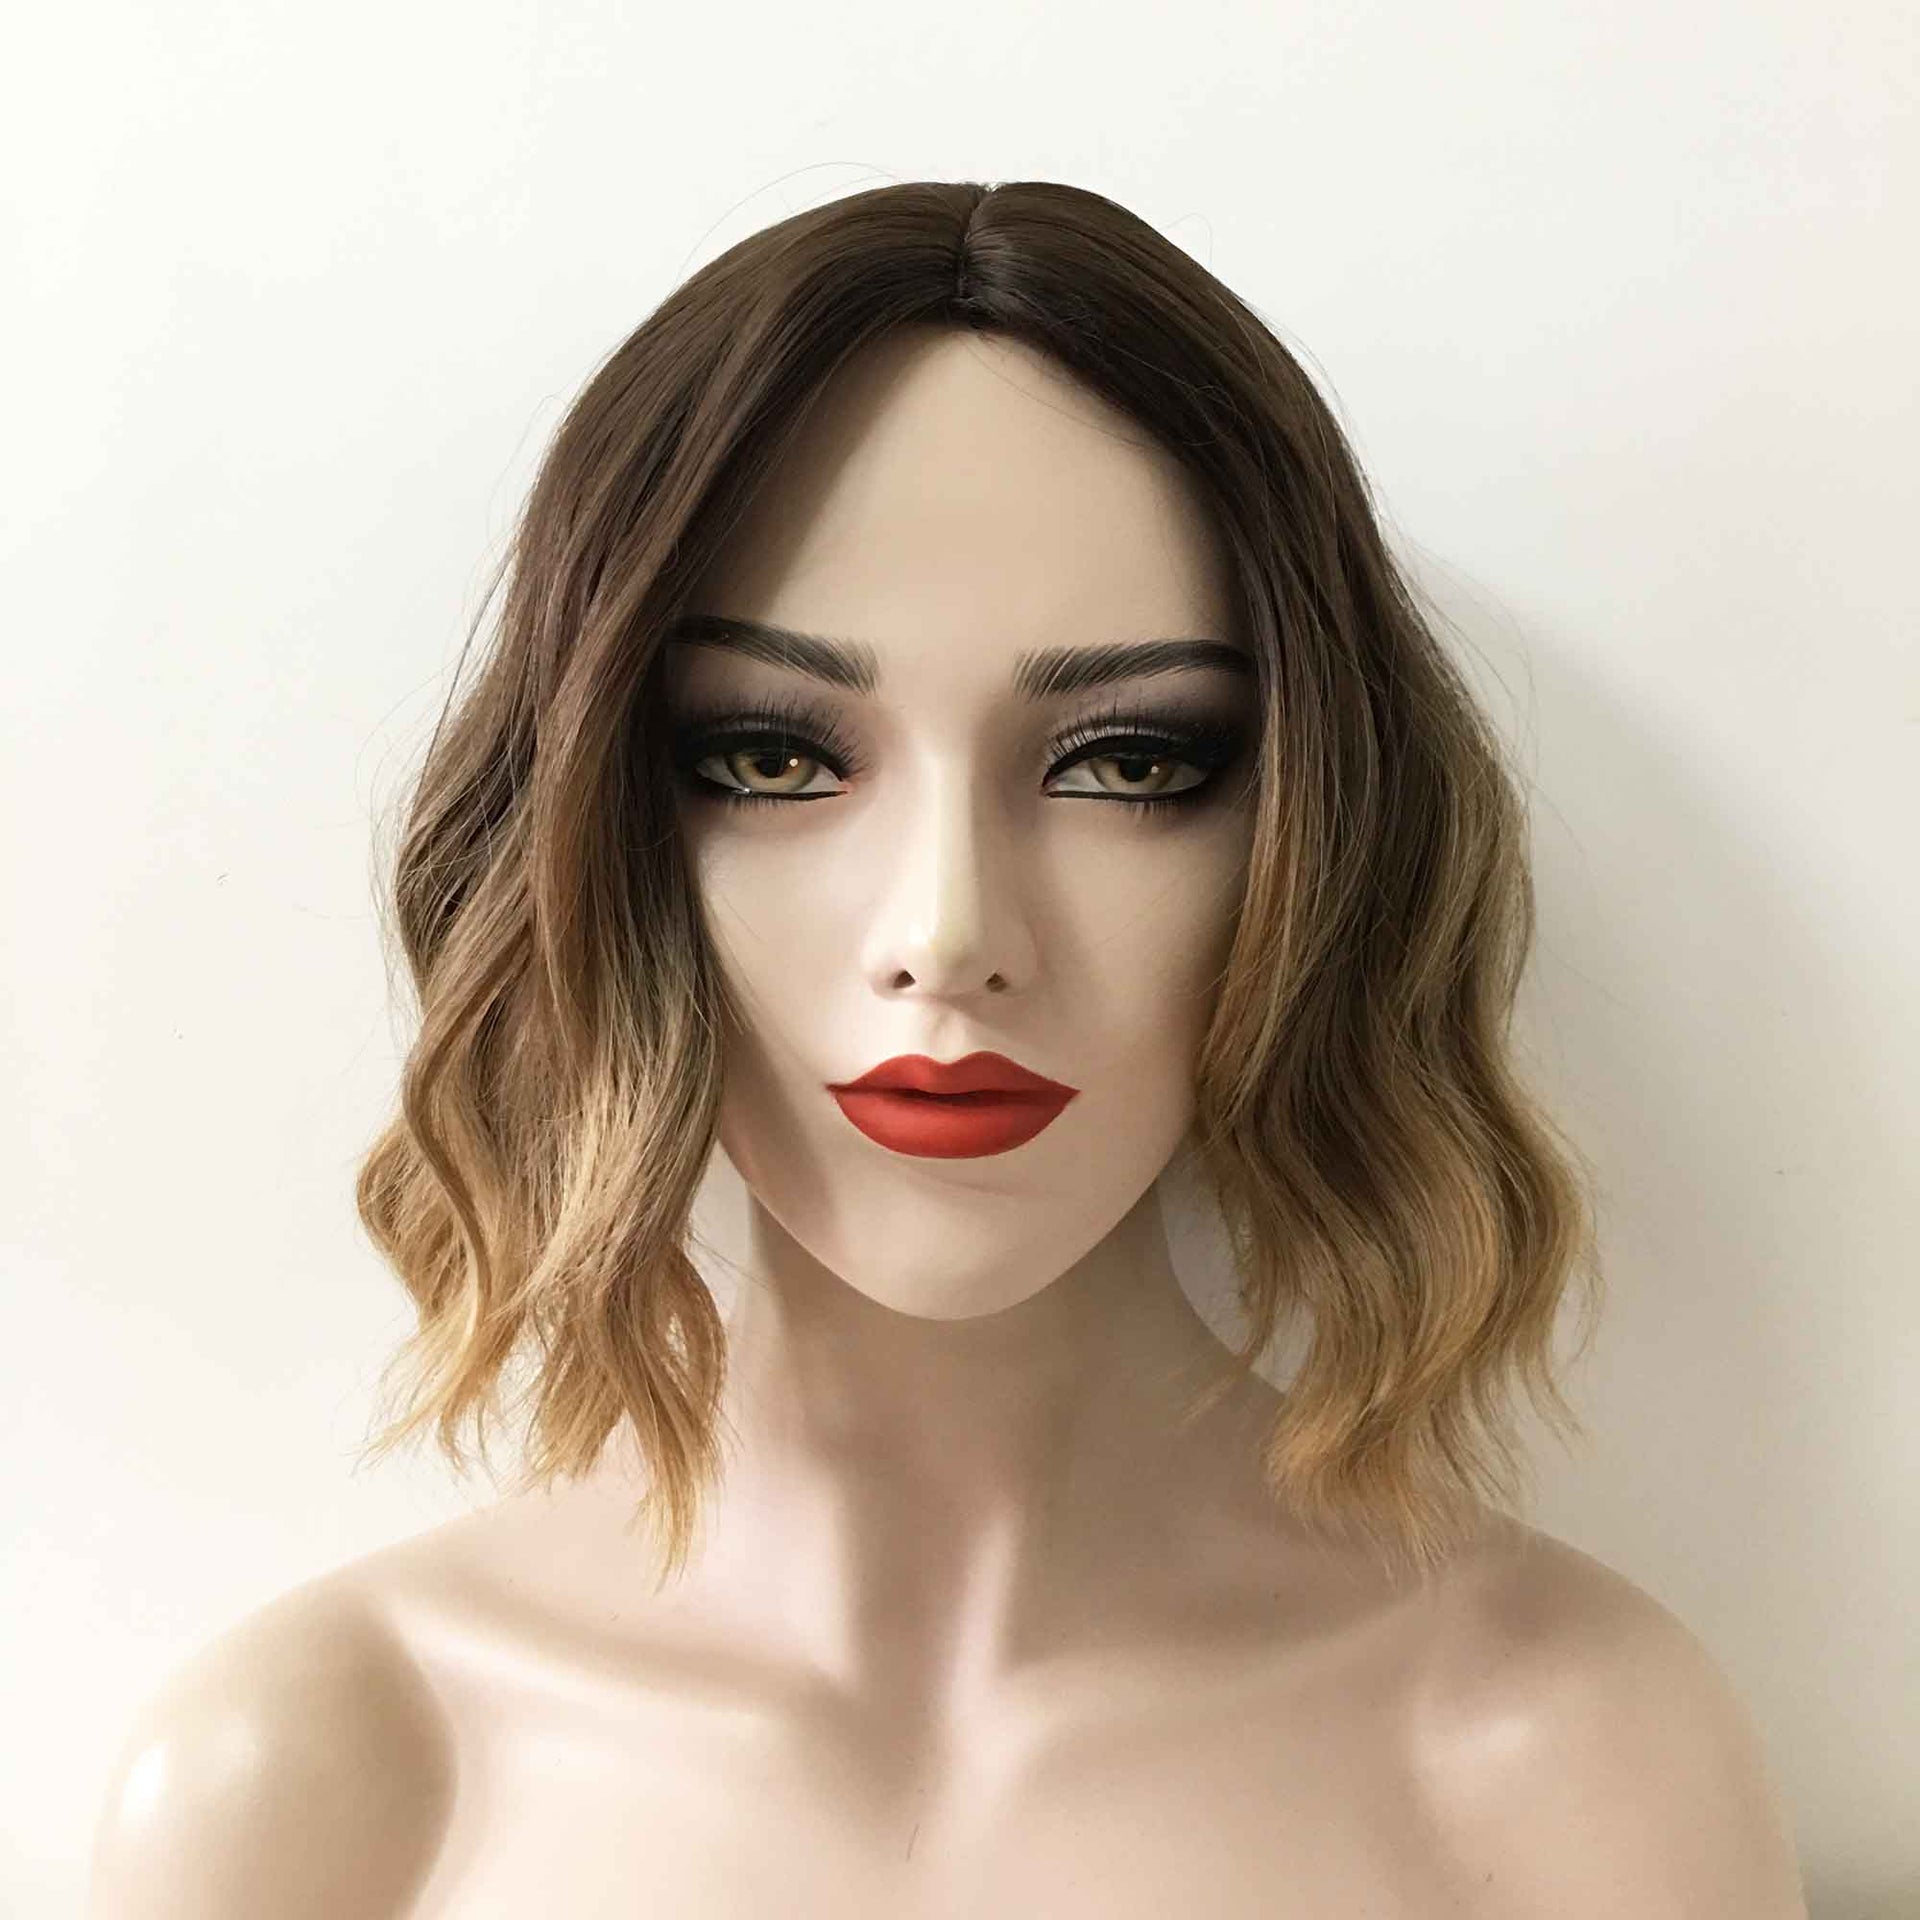 nevermindyrhead Women Ombre Dark Brown Blonde Short Curly Middle Part Bob Wig